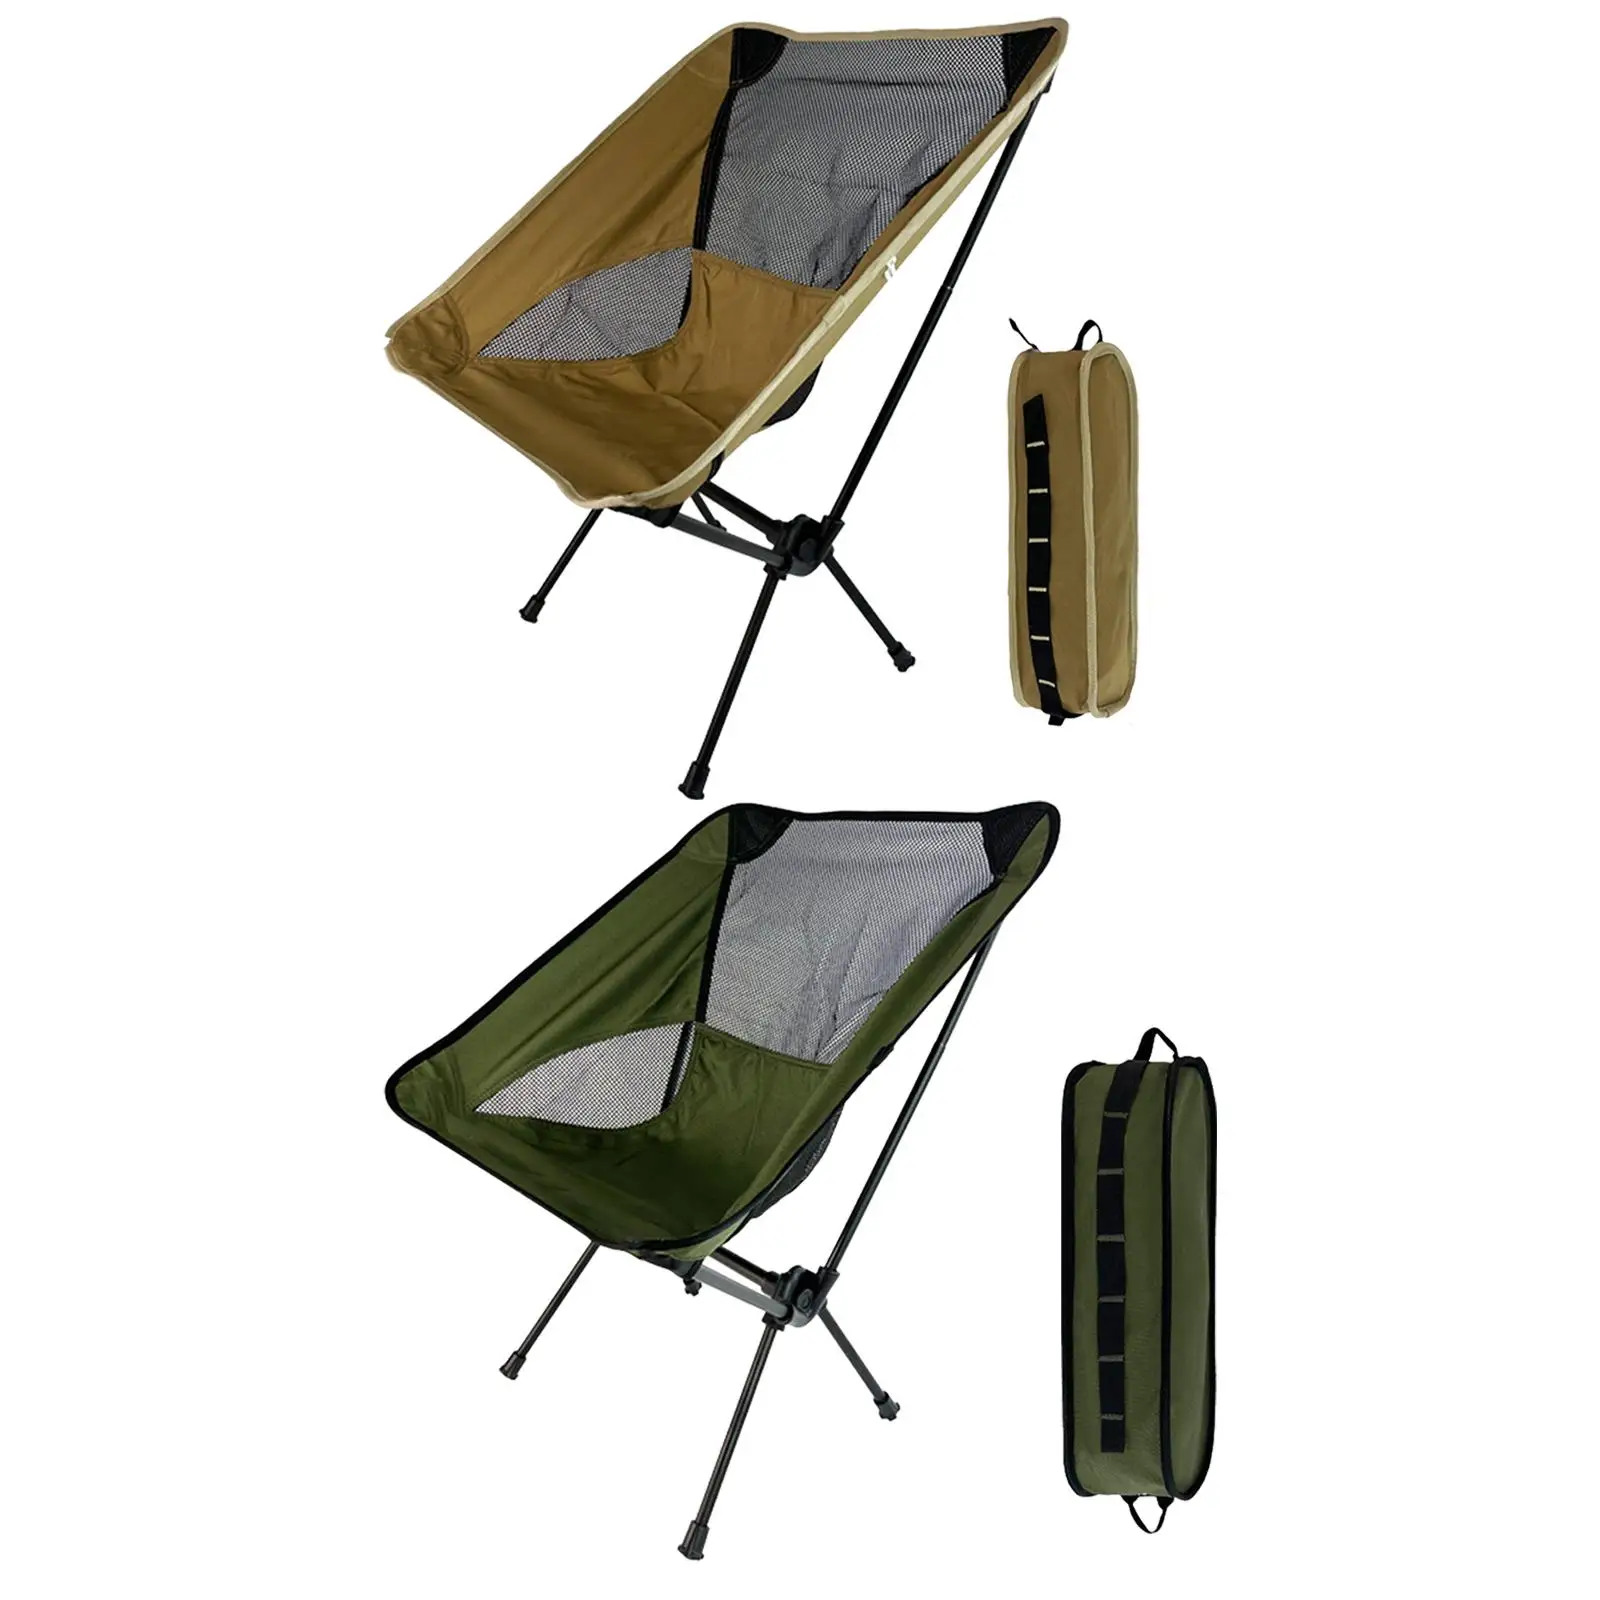 Ultralight Folding Camping Chair Heavy Duty Portable High Back Compact Backrest Stool for Beach, Hiking, Lawn, with Storage Bag